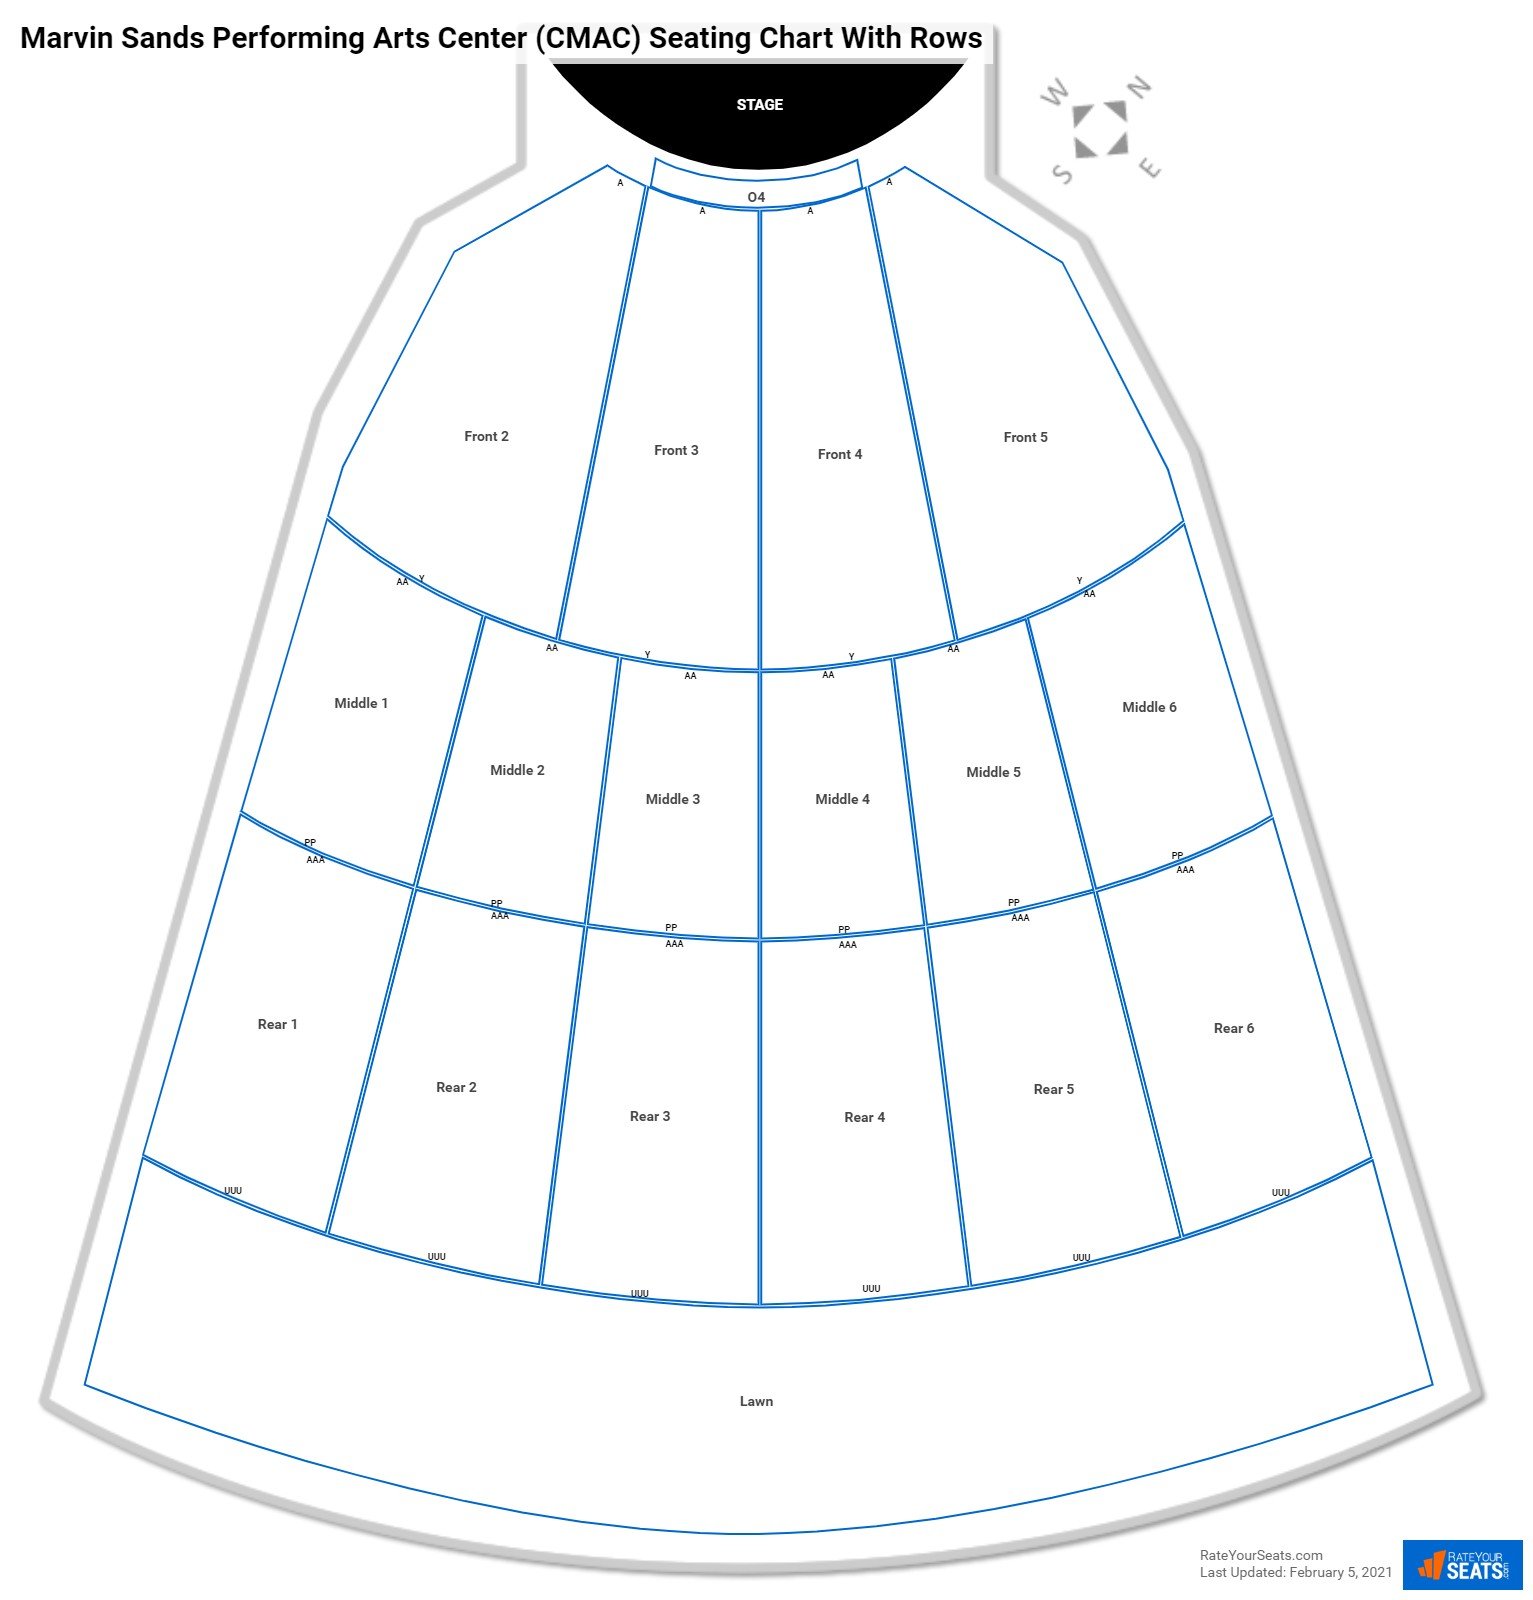 CMAC (Marvin Sands Performing Arts Center) seating chart with row numbers